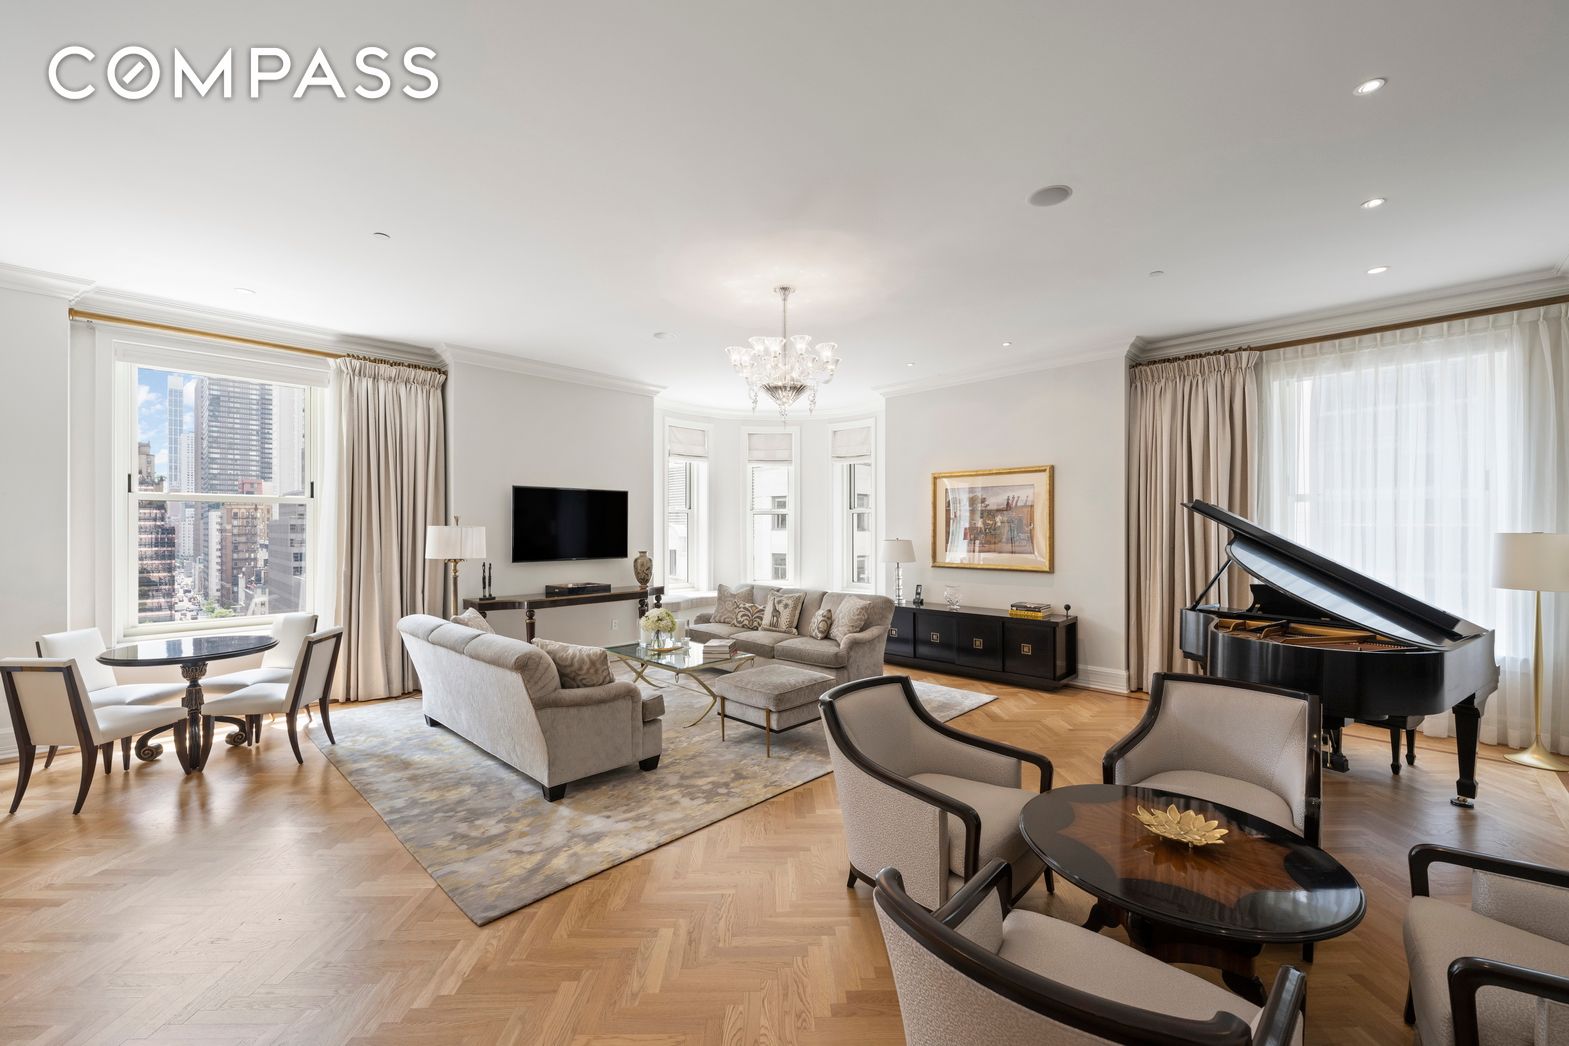 1 Central Park 915, Central Park South, Midtown West, NYC - 3 Bedrooms  
3.5 Bathrooms  
6 Rooms - 